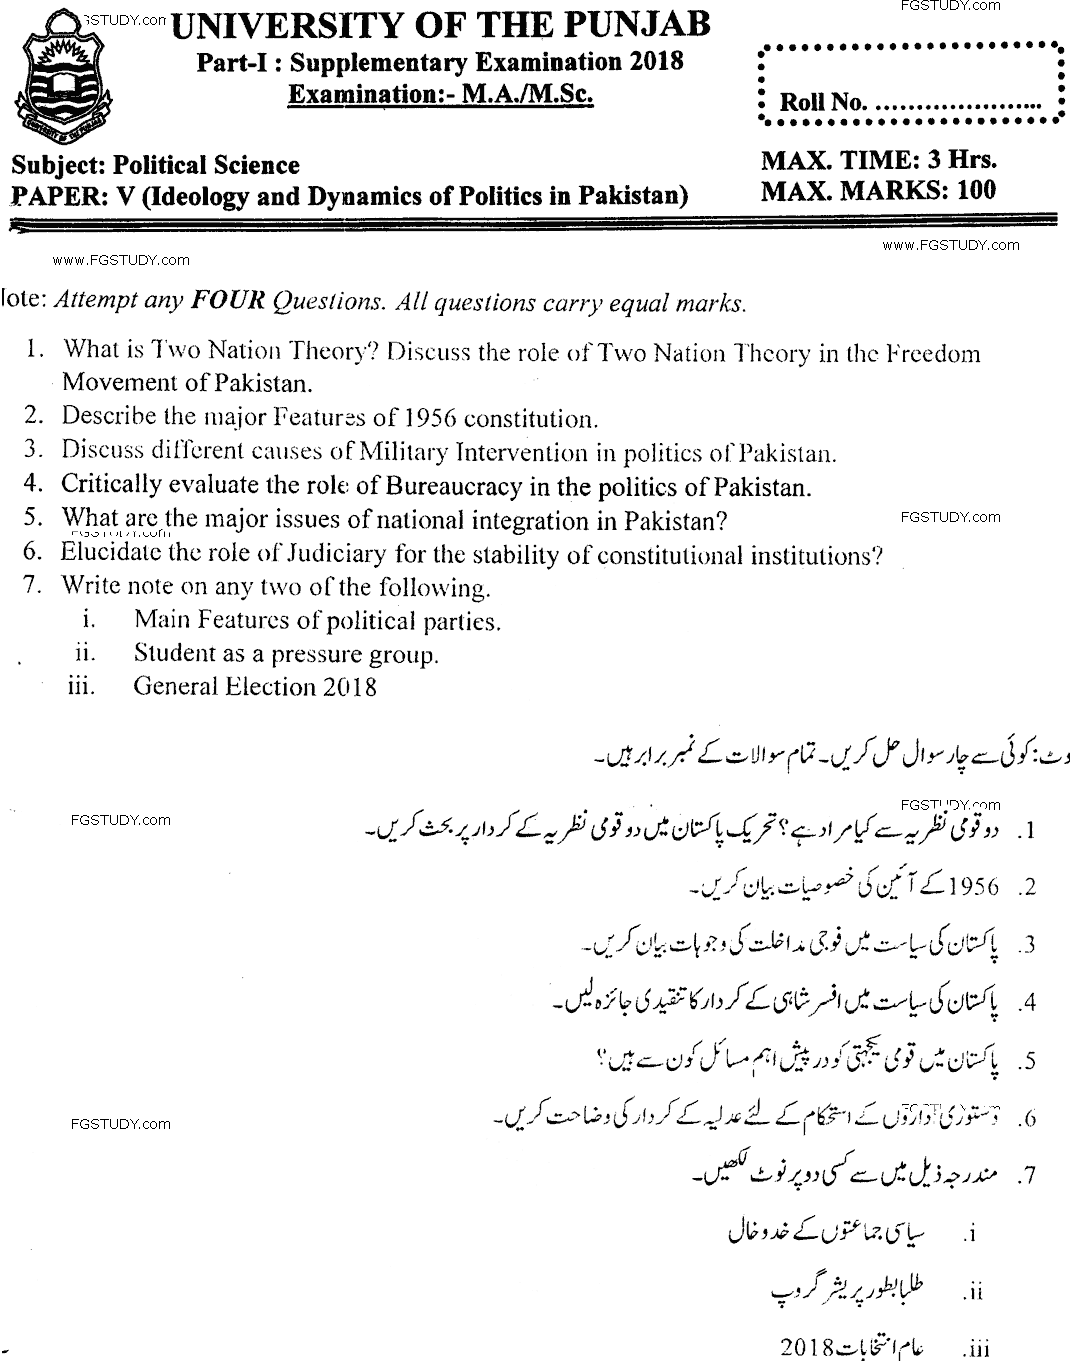 Ma Part 1 Political Science Ideology And Dynamics Of Politics In Pakistan Past Paper 2018 Punjab University